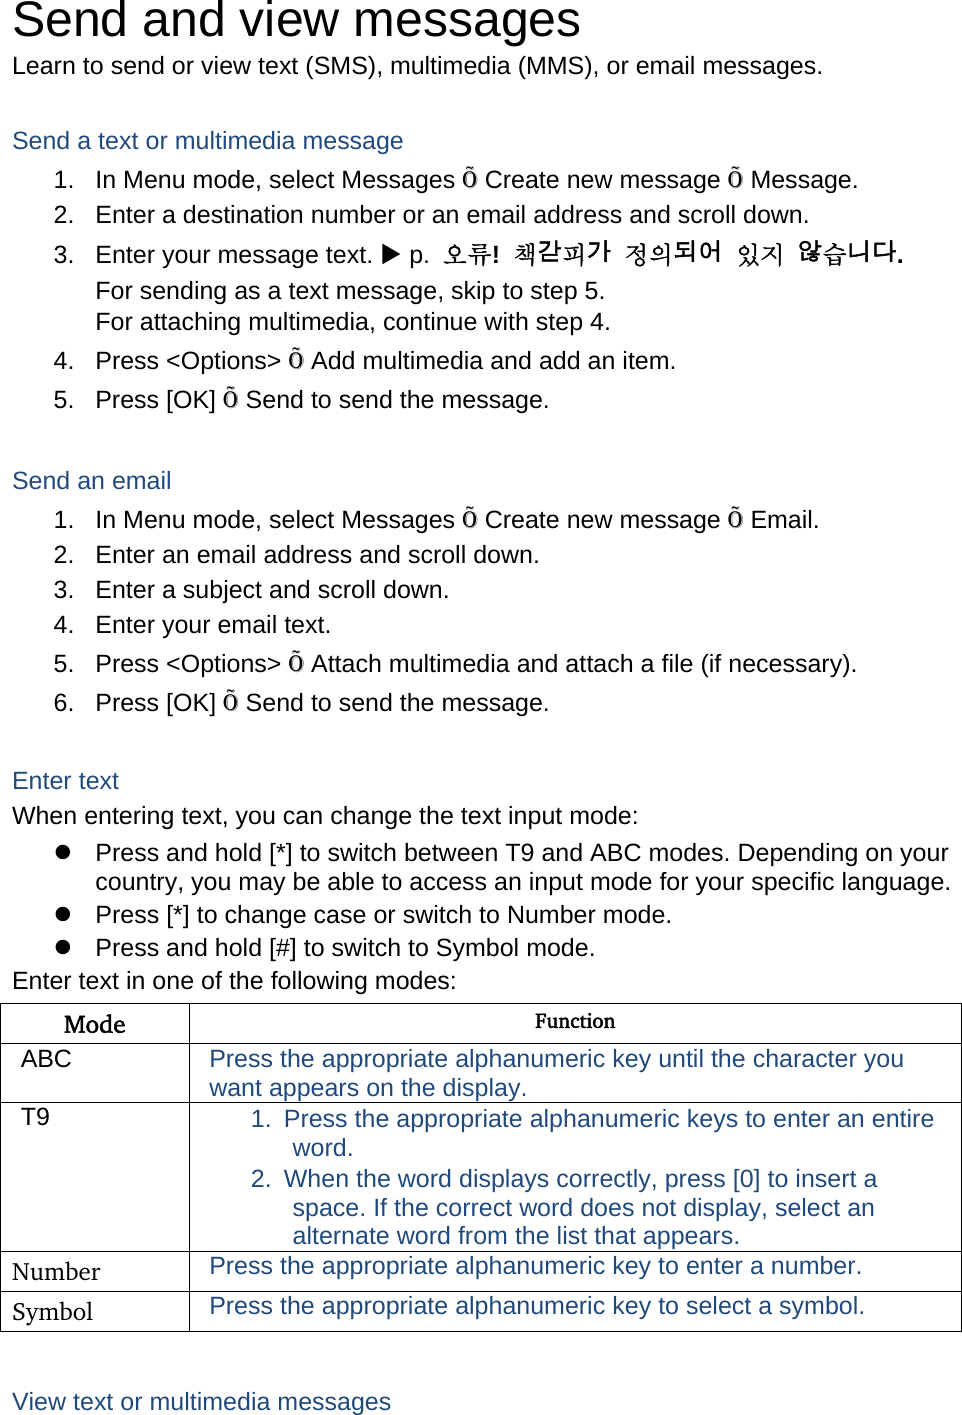 Send and view messages Learn to send or view text (SMS), multimedia (MMS), or email messages.  Send a text or multimedia message 1.  In Menu mode, select Messages Õ Create new message Õ Message. 2.  Enter a destination number or an email address and scroll down. 3.  Enter your message text. X p.  오류!  책갈피가 정의되어 있지 않습니다. For sending as a text message, skip to step 5. For attaching multimedia, continue with step 4. 4. Press &lt;Options&gt; Õ Add multimedia and add an item. 5. Press [OK] Õ Send to send the message.  Send an email 1.  In Menu mode, select Messages Õ Create new message Õ Email. 2.  Enter an email address and scroll down. 3.  Enter a subject and scroll down. 4.  Enter your email text. 5. Press &lt;Options&gt; Õ Attach multimedia and attach a file (if necessary). 6. Press [OK] Õ Send to send the message.  Enter text When entering text, you can change the text input mode: z  Press and hold [*] to switch between T9 and ABC modes. Depending on your country, you may be able to access an input mode for your specific language. z  Press [*] to change case or switch to Number mode. z  Press and hold [#] to switch to Symbol mode. Enter text in one of the following modes: Mode  Function ABC  Press the appropriate alphanumeric key until the character you want appears on the display. T9  1.  Press the appropriate alphanumeric keys to enter an entire word. 2.  When the word displays correctly, press [0] to insert a space. If the correct word does not display, select an alternate word from the list that appears. Number  Press the appropriate alphanumeric key to enter a number. Symbol  Press the appropriate alphanumeric key to select a symbol.  View text or multimedia messages 